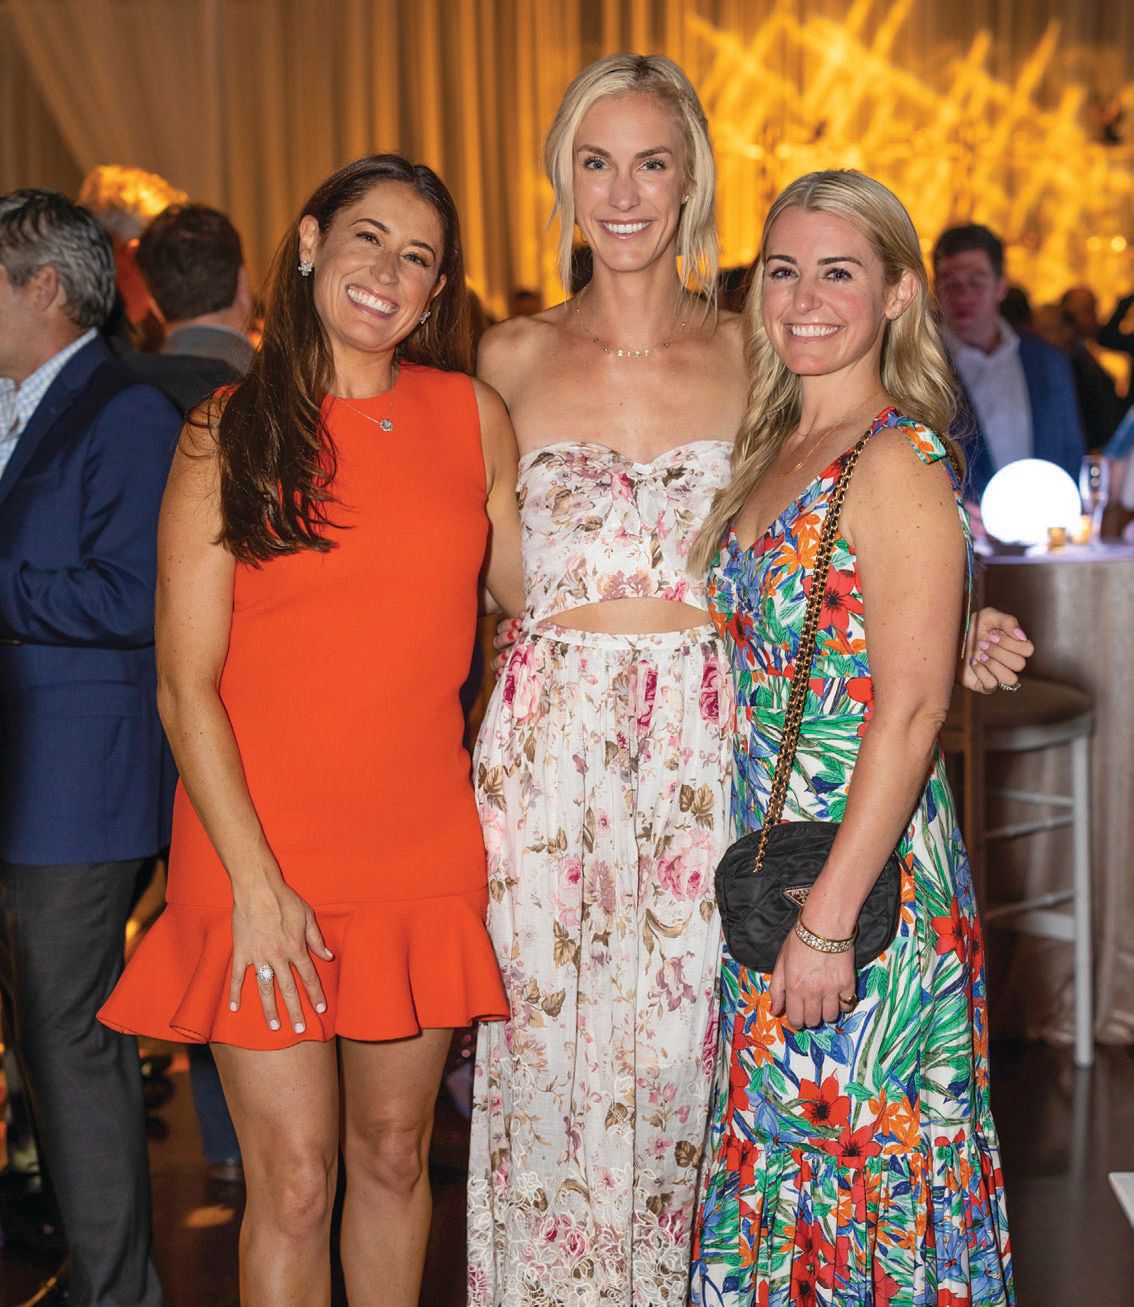 Margaret Nelson, Elizabeth Moore and Caroline Moore strike a pose at the Rush Woman’s Board 2022 Fall Benefit. PHOTO BY ROBIN SUBAR PHOTOGRAPHY